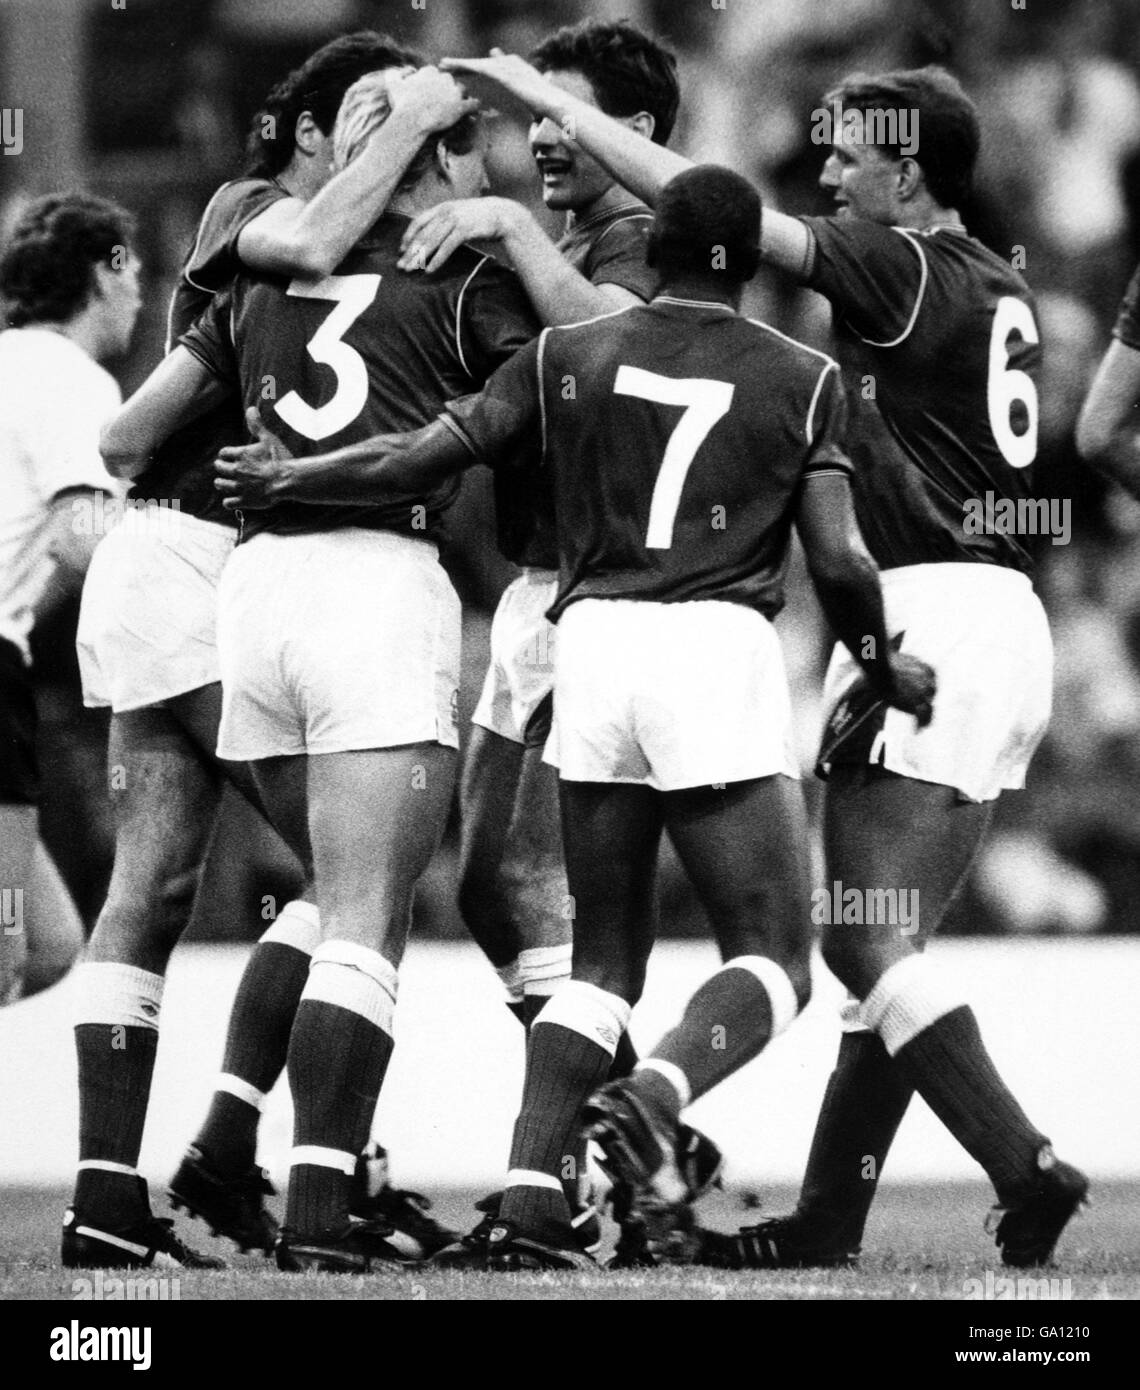 Nottingham Forest Captain Stuart Pearce (3) is mobbed by team mates Paul Wilkinson, Nigel CLough, Franz Carr (7) and David Campbell (6) after scoring penalty Stock Photo